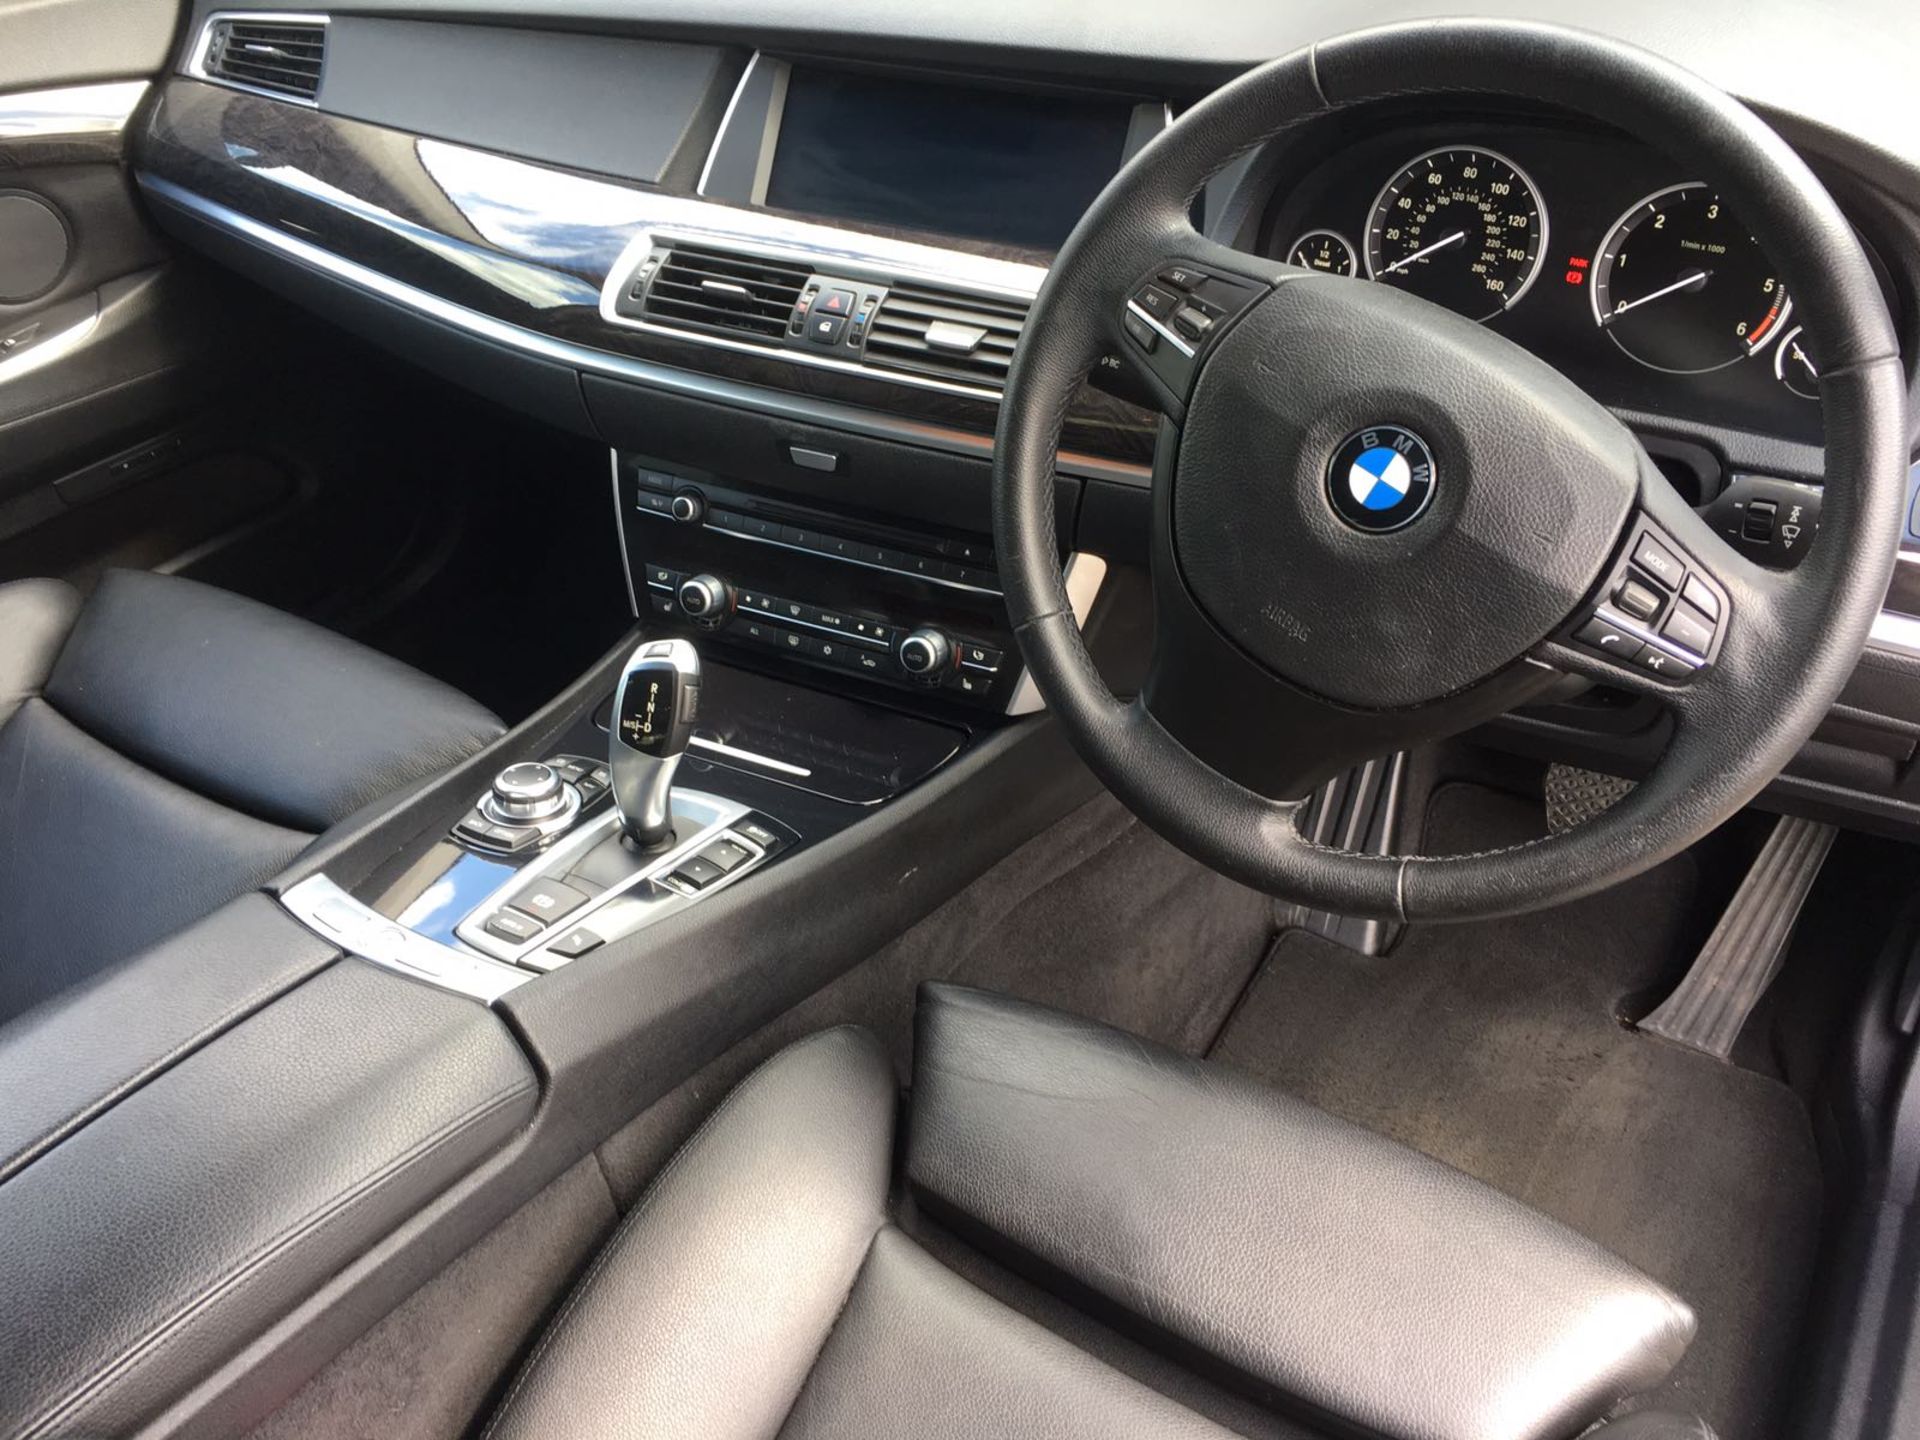 BMW 535d GT GRAN TURISMO 2012/12. 57,000 miles Mega spec and fully loaded. 4 New Tyres Just Fitted! - Image 13 of 19